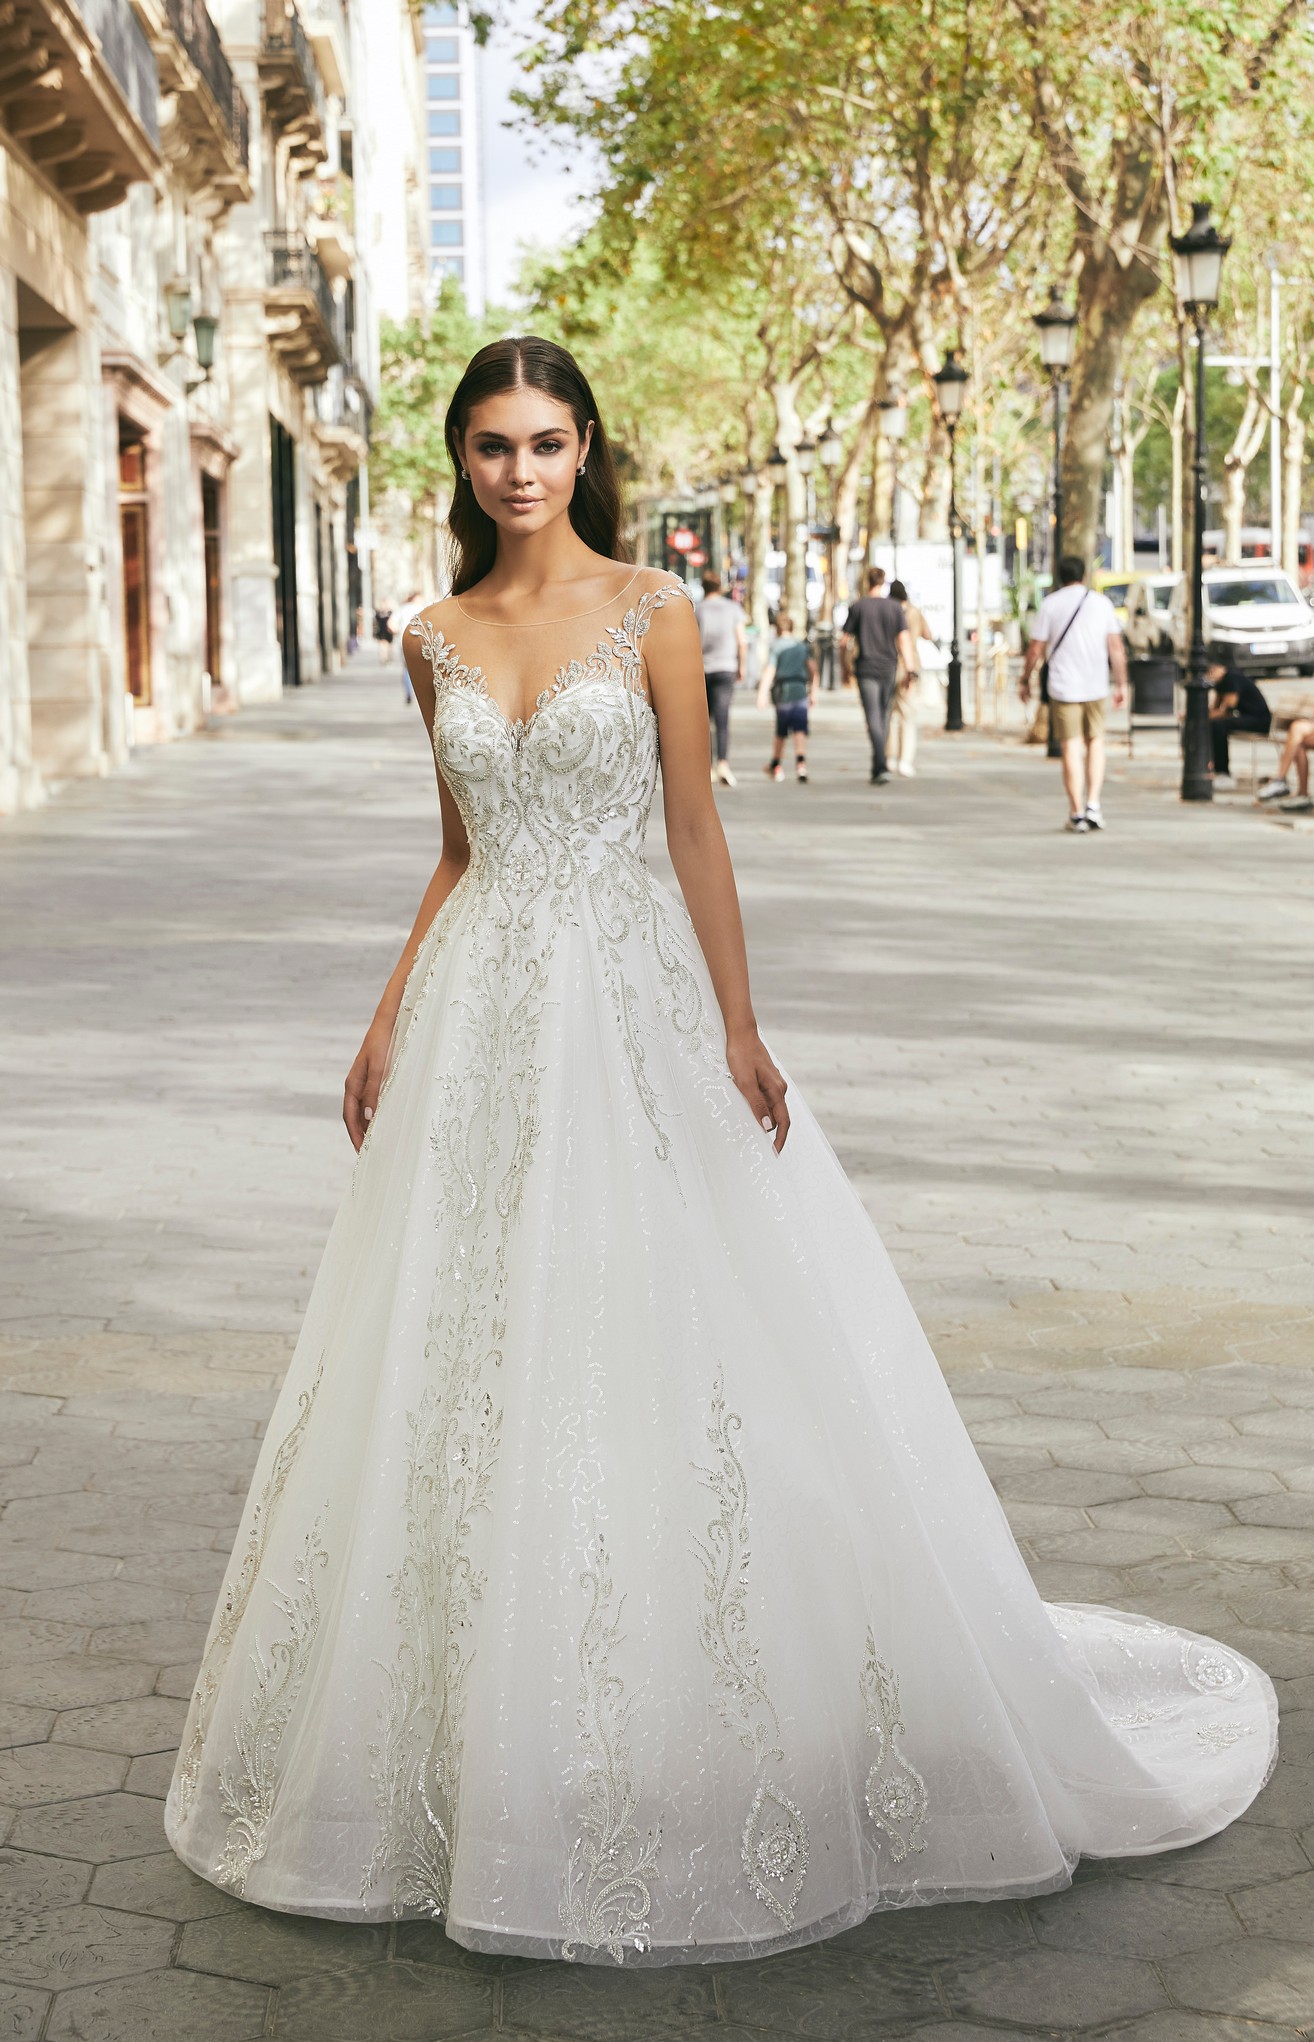 Brunette model stood in a sunny black lamp post and tree-lined street in Ronald Joyce 69720, an ivory and silver sparkly A-line wedding dress with a sweetheart bodice, glitter tulle skirt and sparkly illusion off-the-shoulder sleeve.